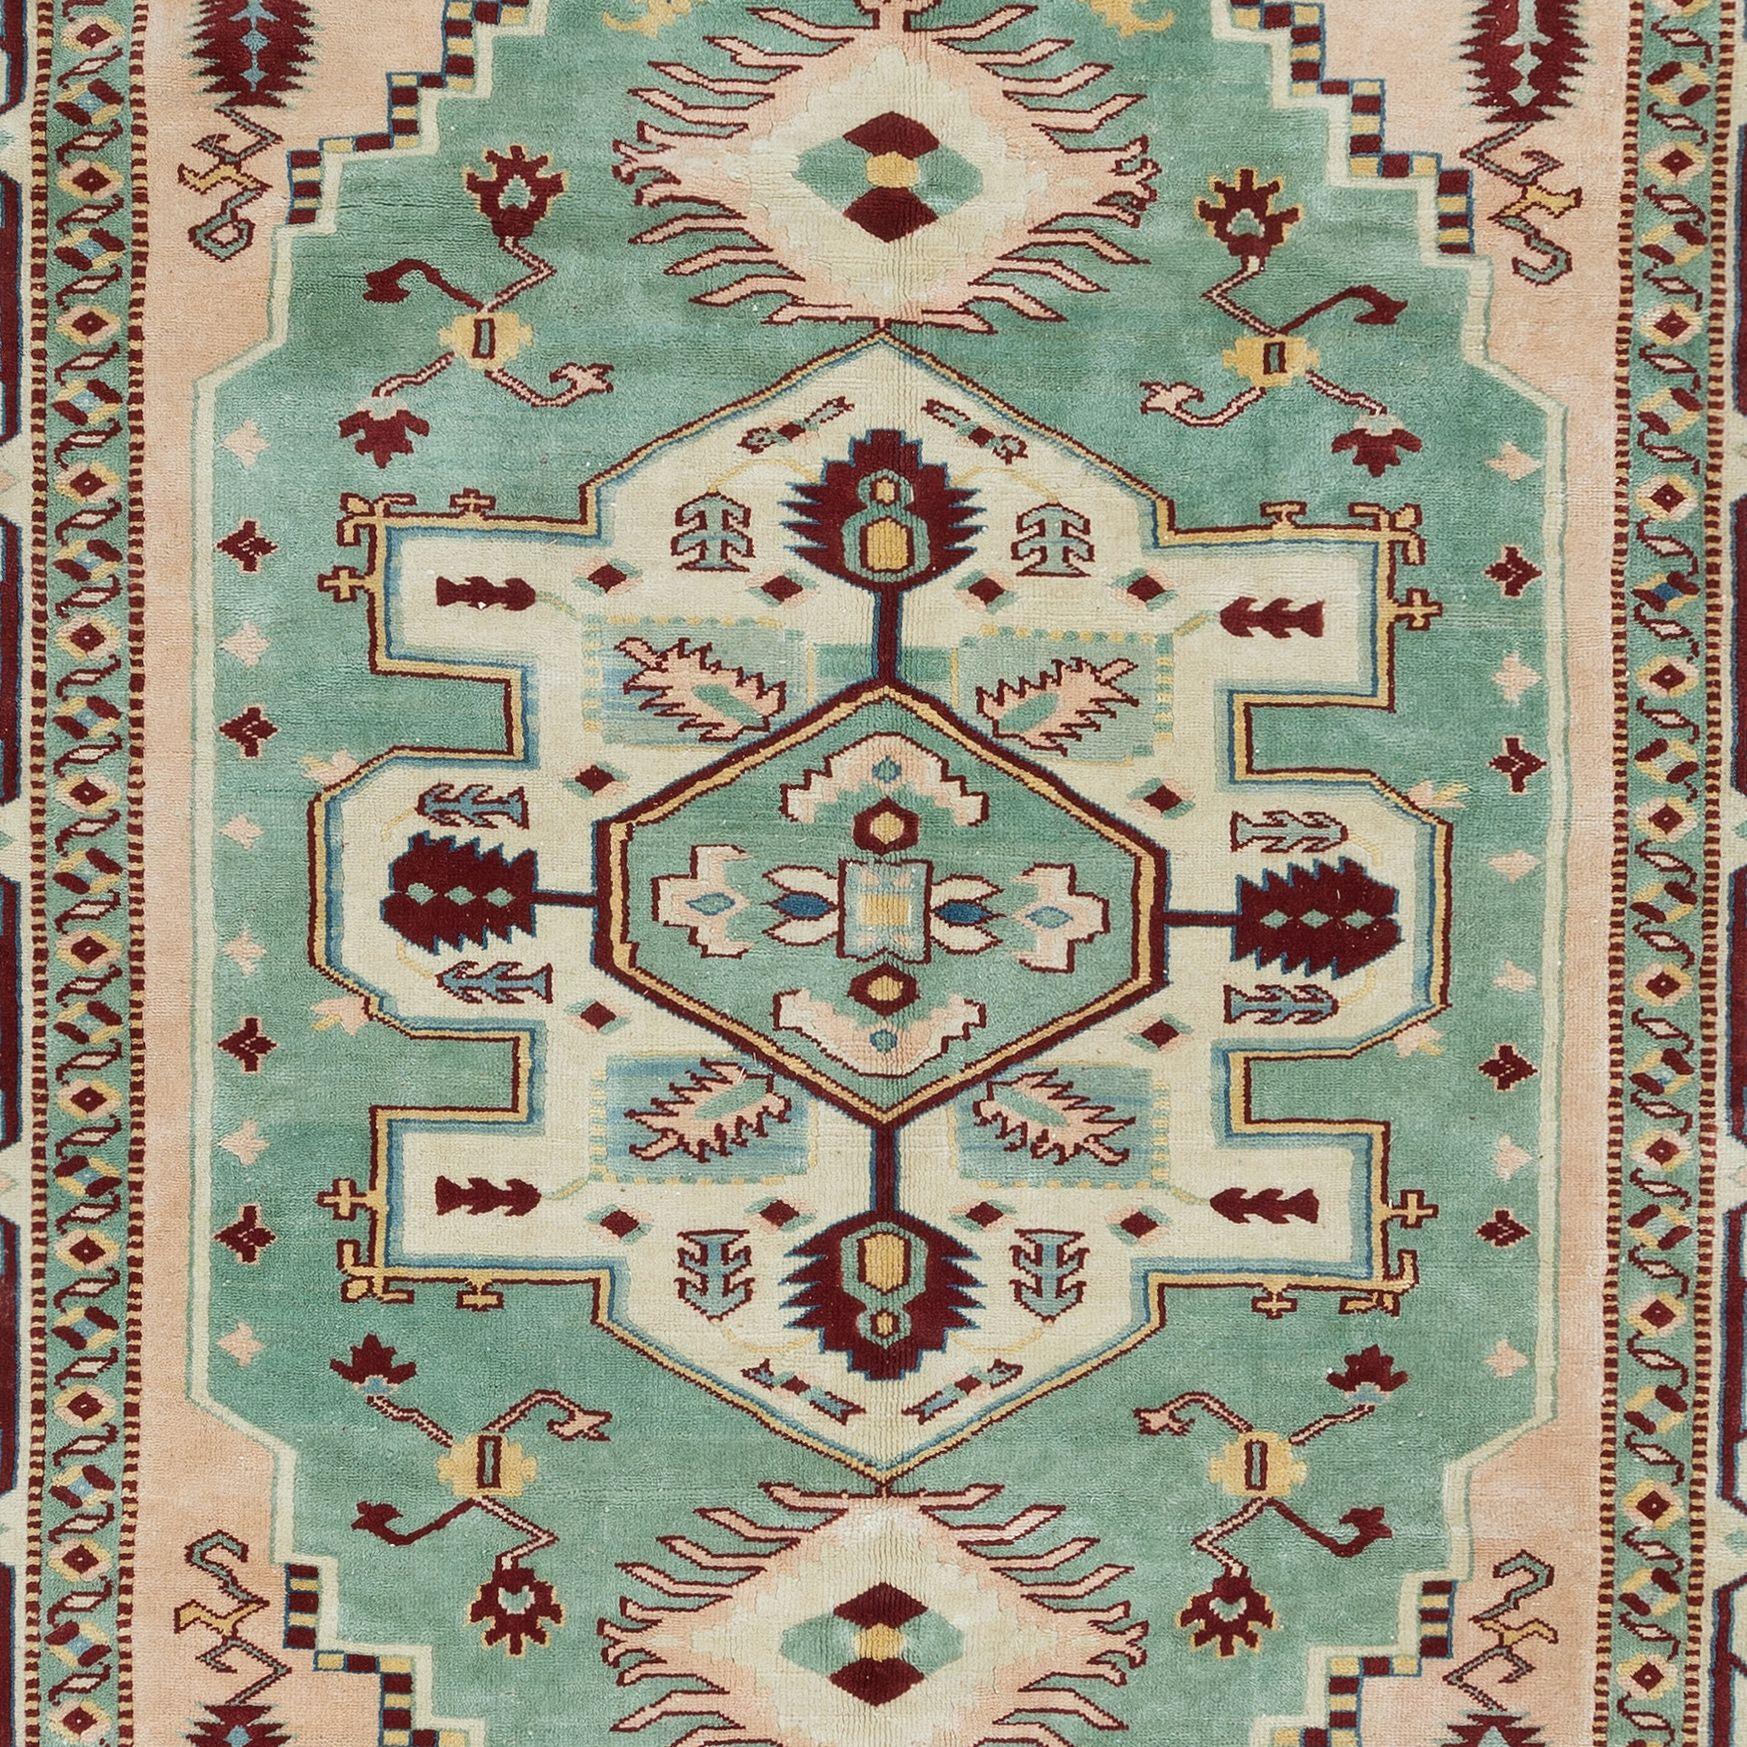 6.4x8 Ft Handmade Area Rug, Unique Vintage Turkish Carpet with Fringe, 100% Wool In Good Condition For Sale In Philadelphia, PA